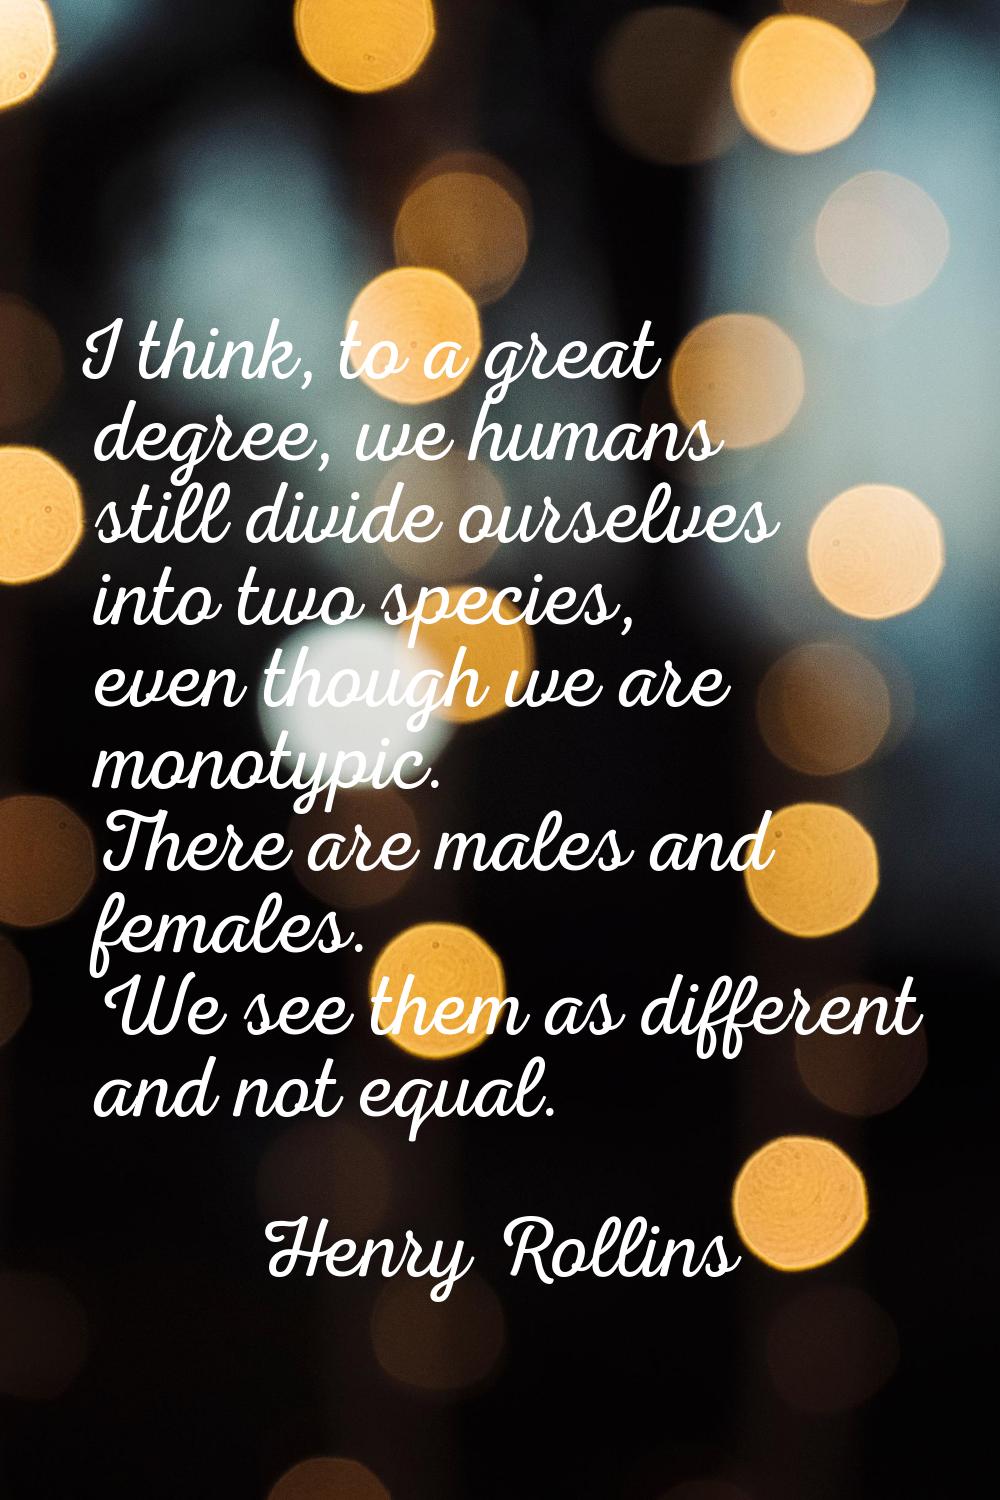 I think, to a great degree, we humans still divide ourselves into two species, even though we are m